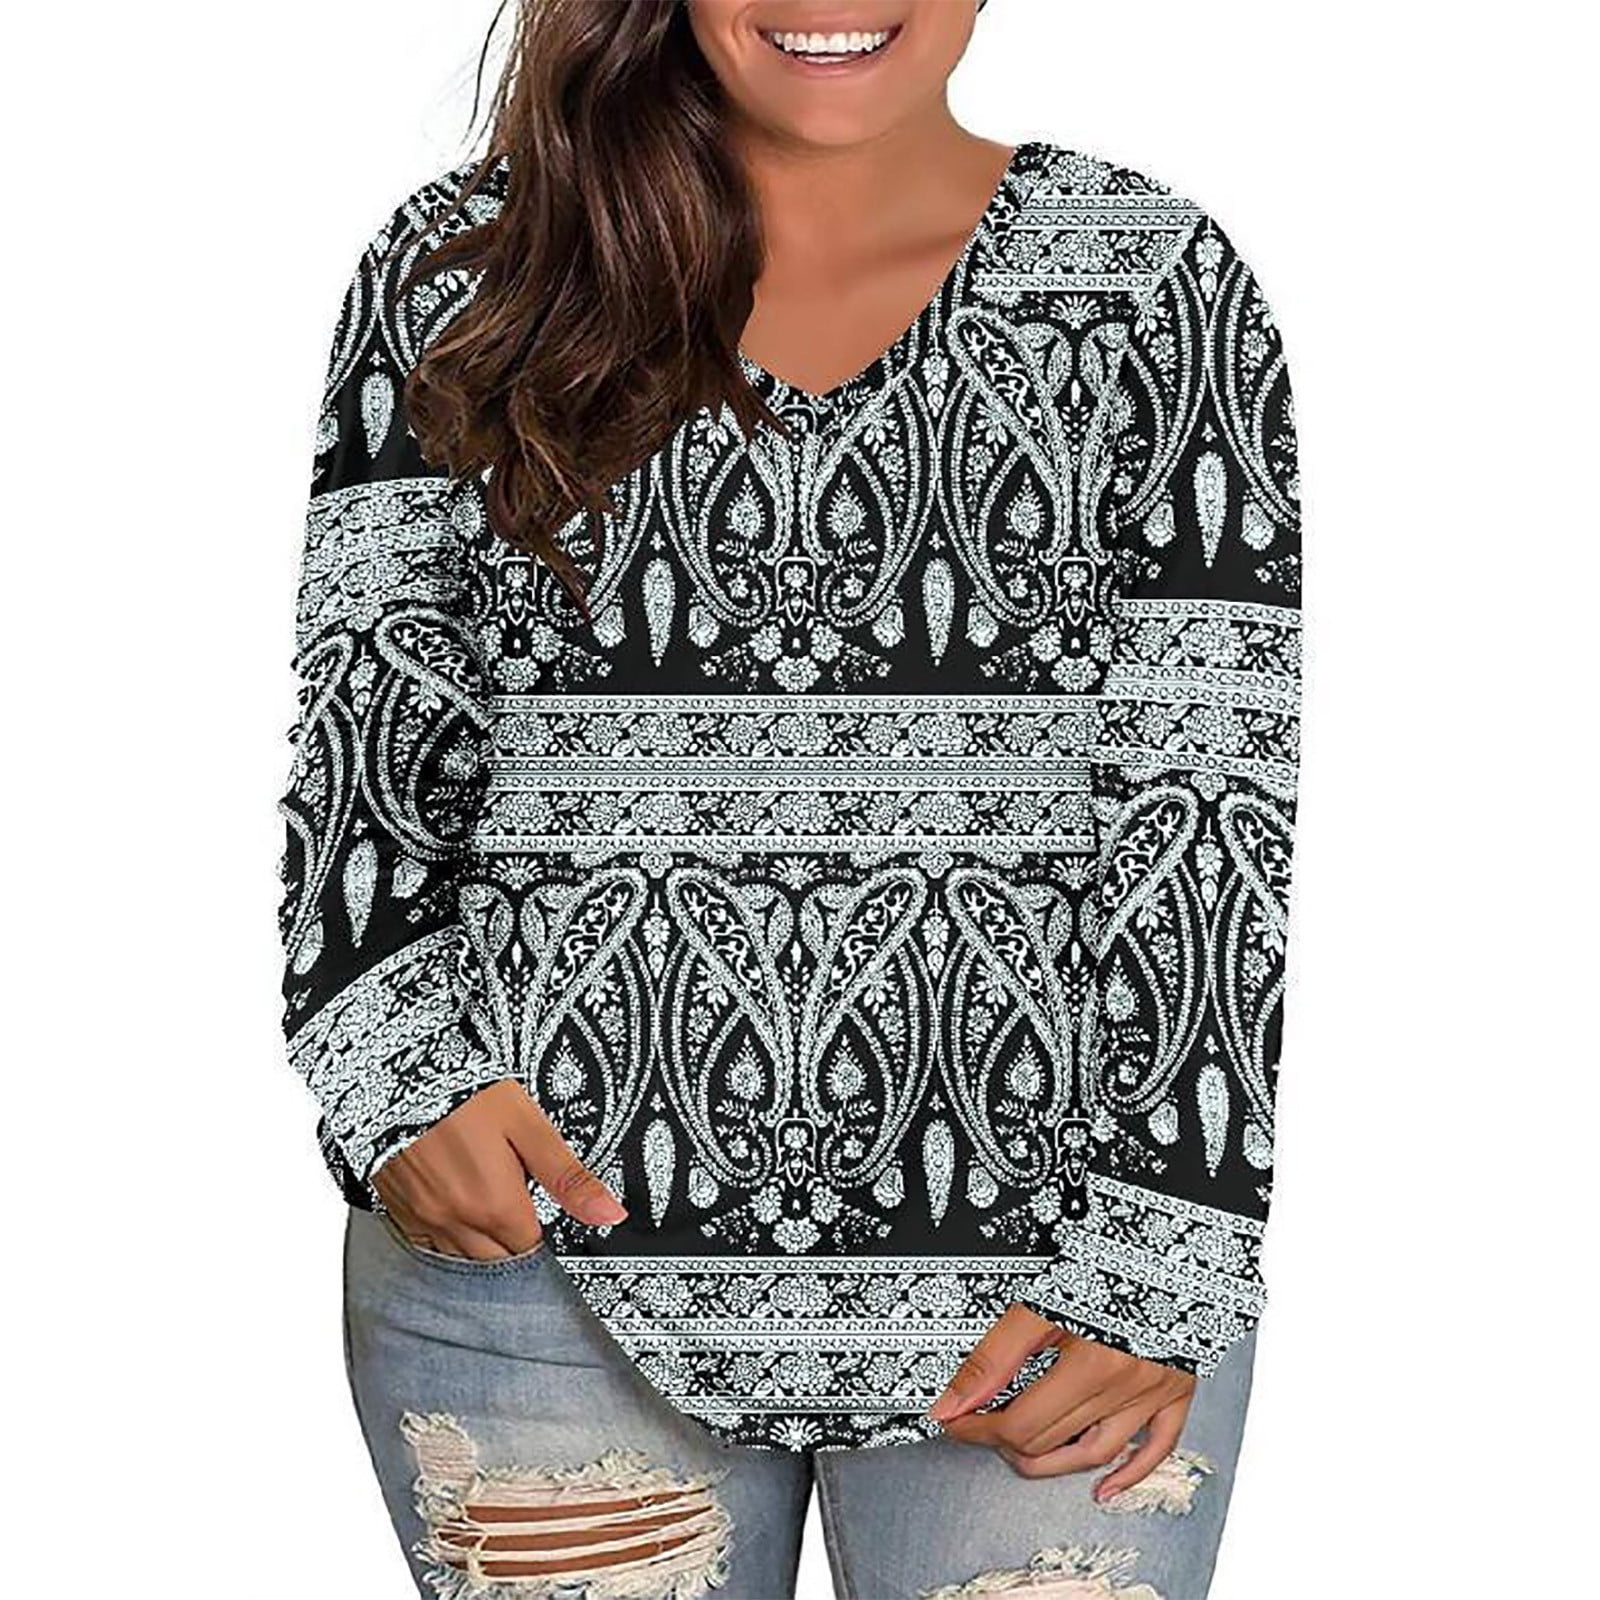 Flowy Dressy Tunic Tops to Wear with Leggings Plus Size Tops for Women Comfy Hide Belly Long Shirt Button V-Neck Floral Printing Long Shirts Gray S Walmart.com